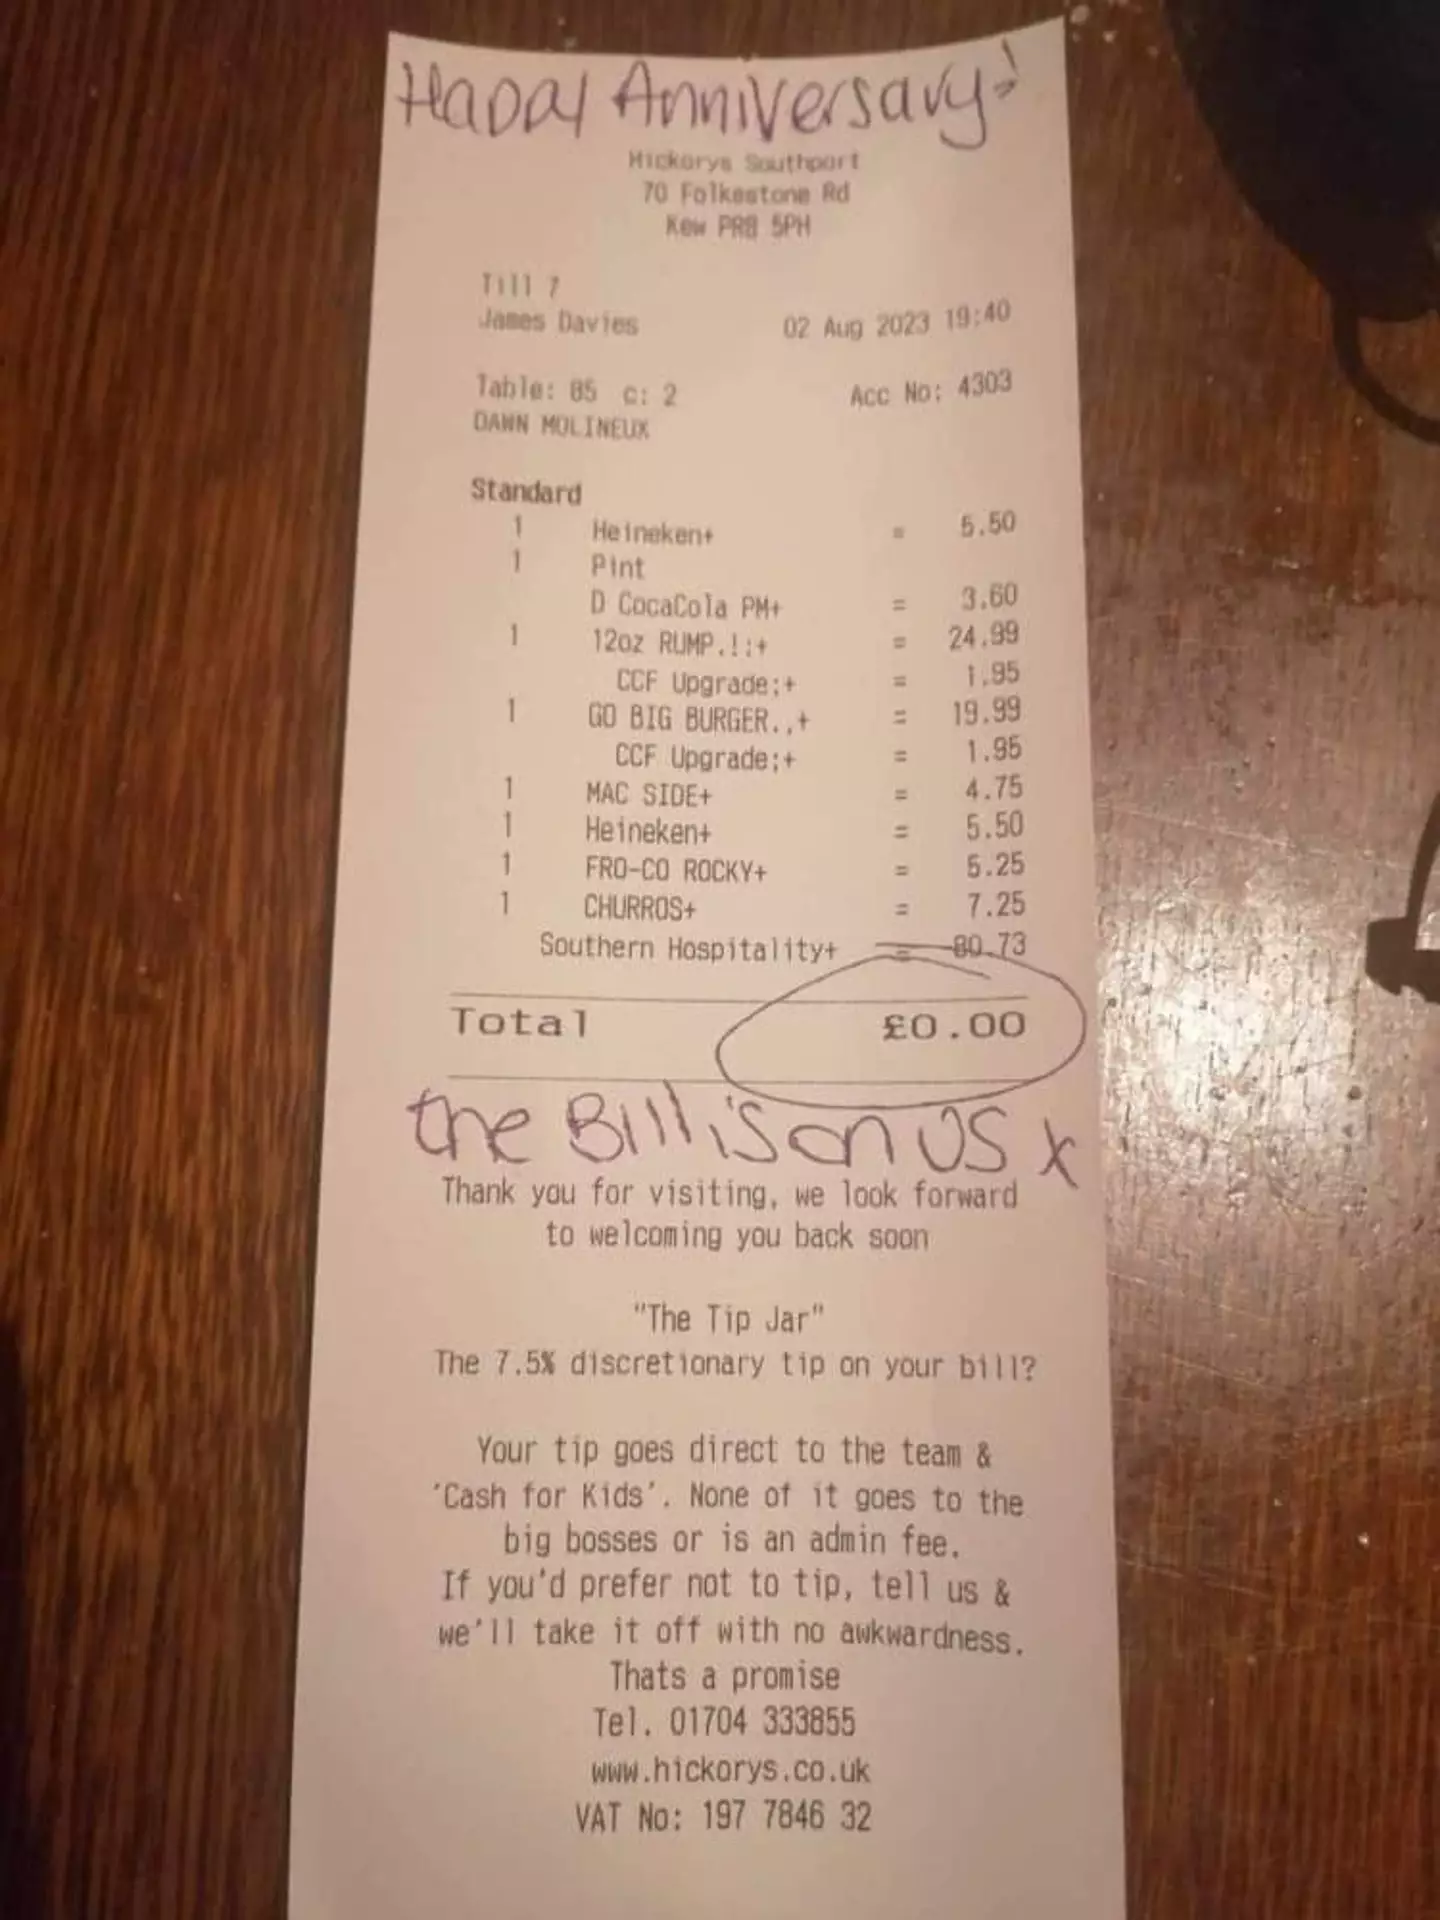 The restaurant cleared their bill after hearing the couple's story.